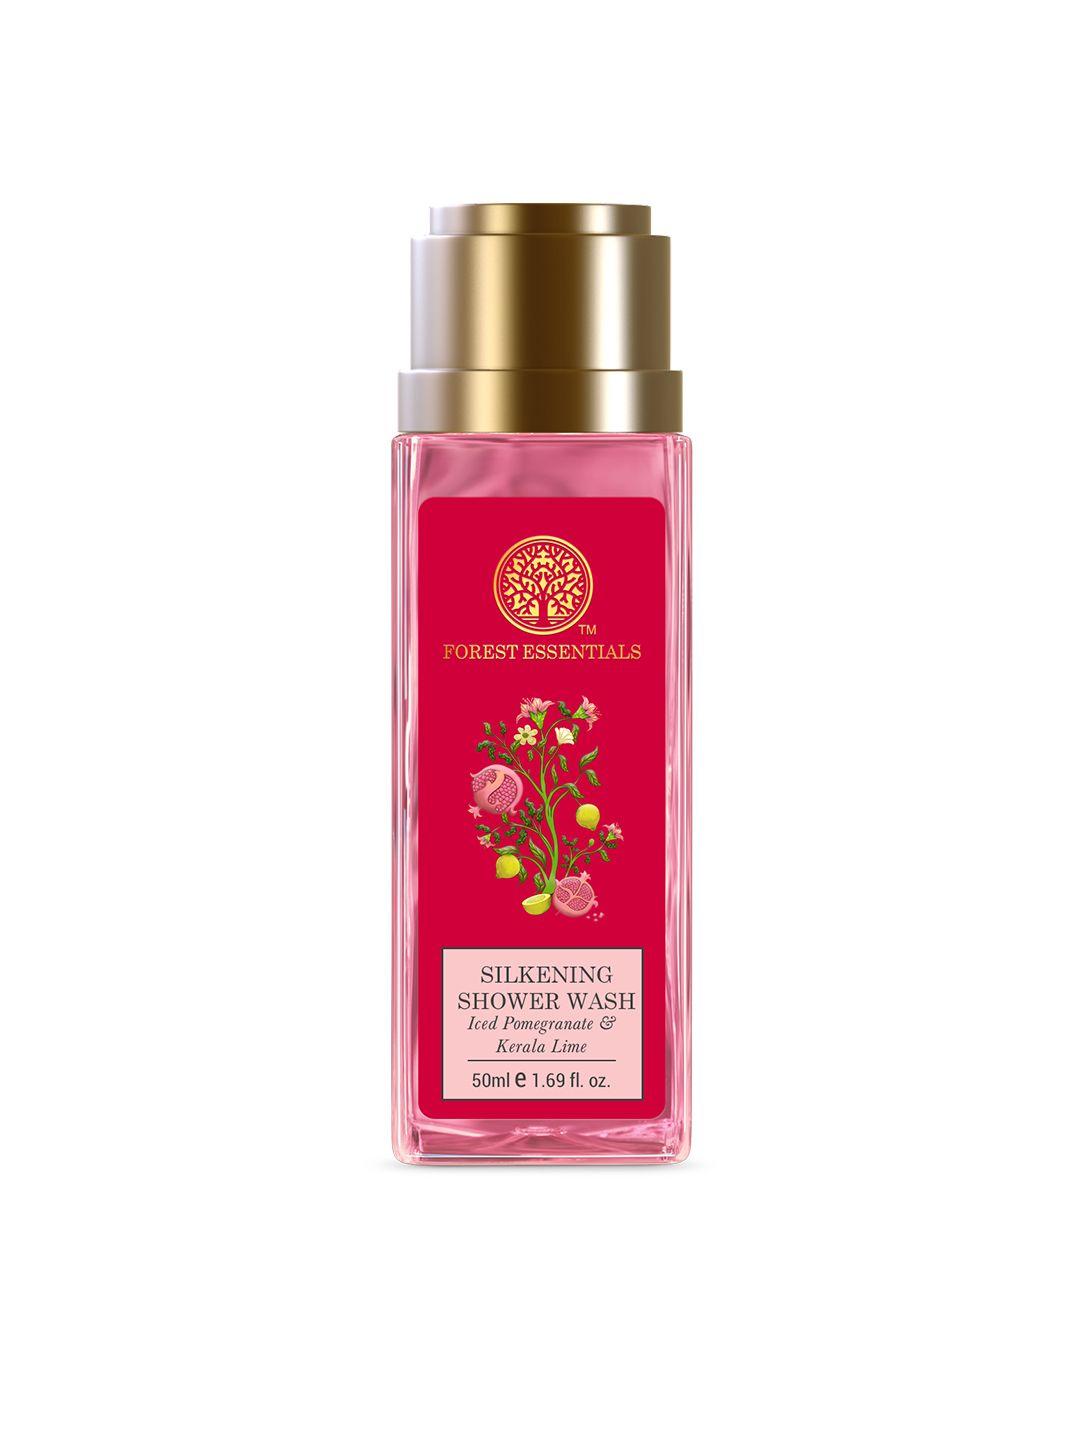 forest essentials silkening shower wash with iced pomegranate & kerala lime - 50ml